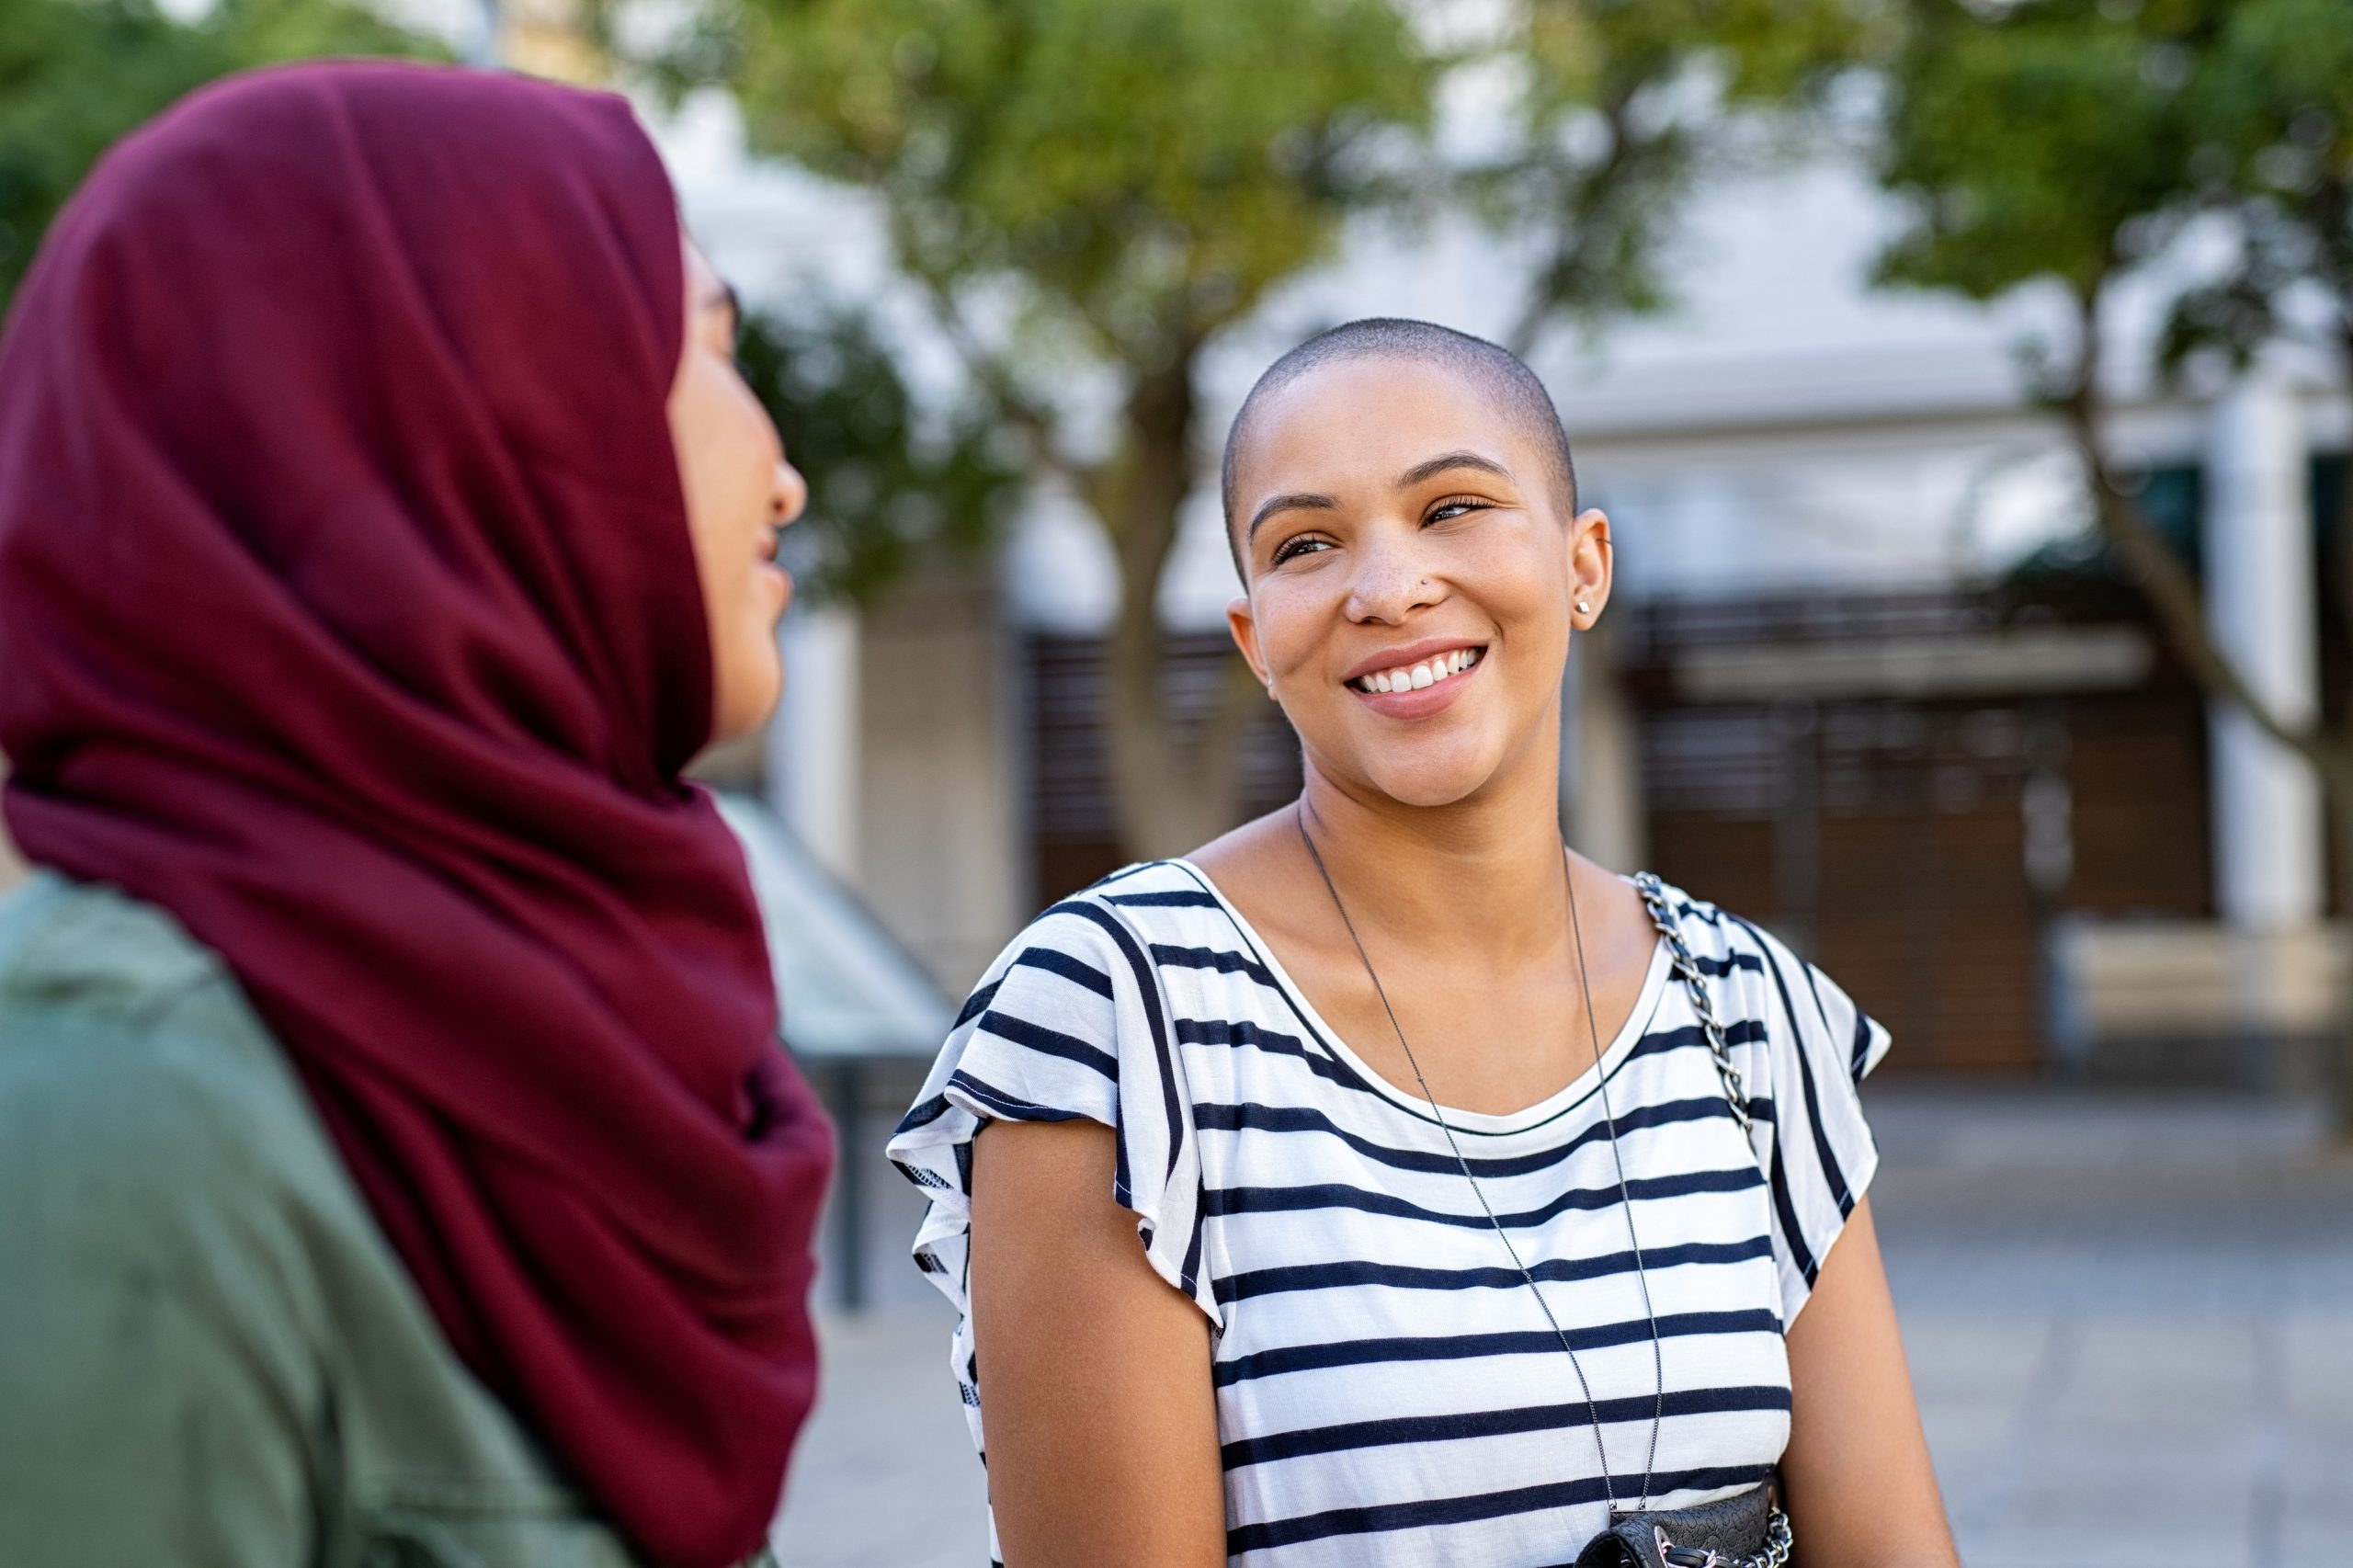 There are two multiethnic women, one of which is wearing a hijab talking with each other. This is a symbol for interviewing women and gathering research.